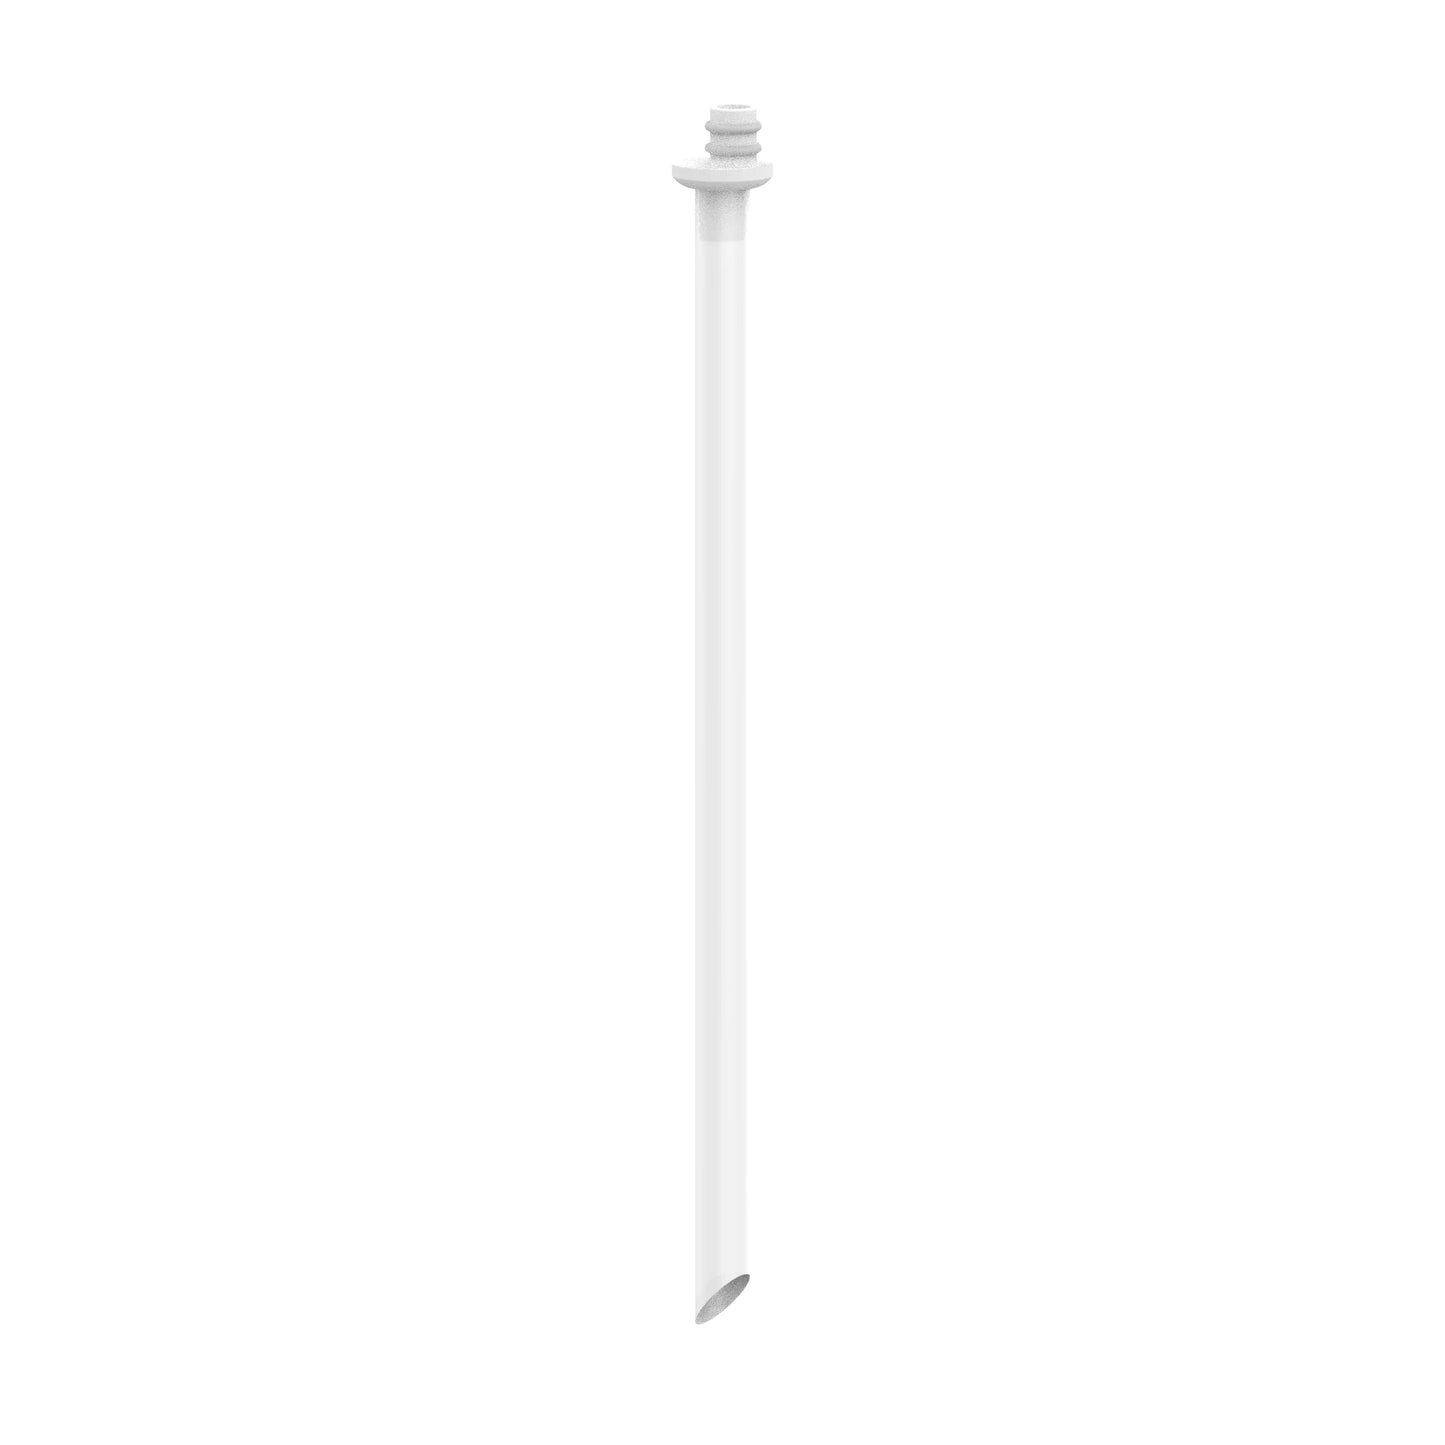 Add-on Straw Accessory for ION8 Water Bottles, Reusable Straw, Large